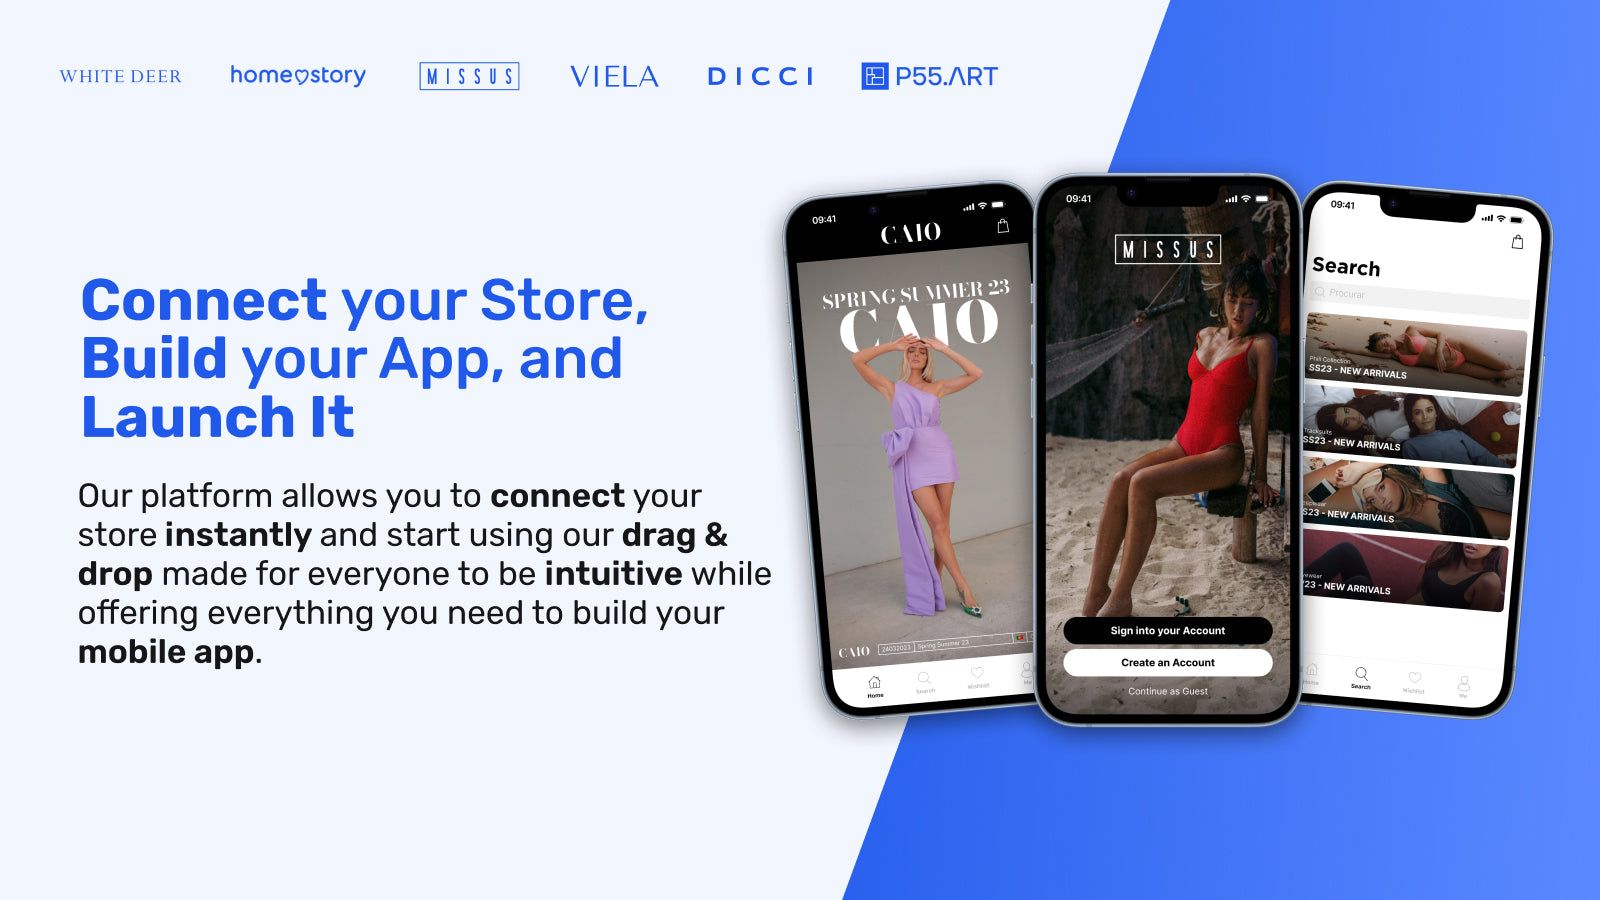 Instantly connect your store, build your app and launch it